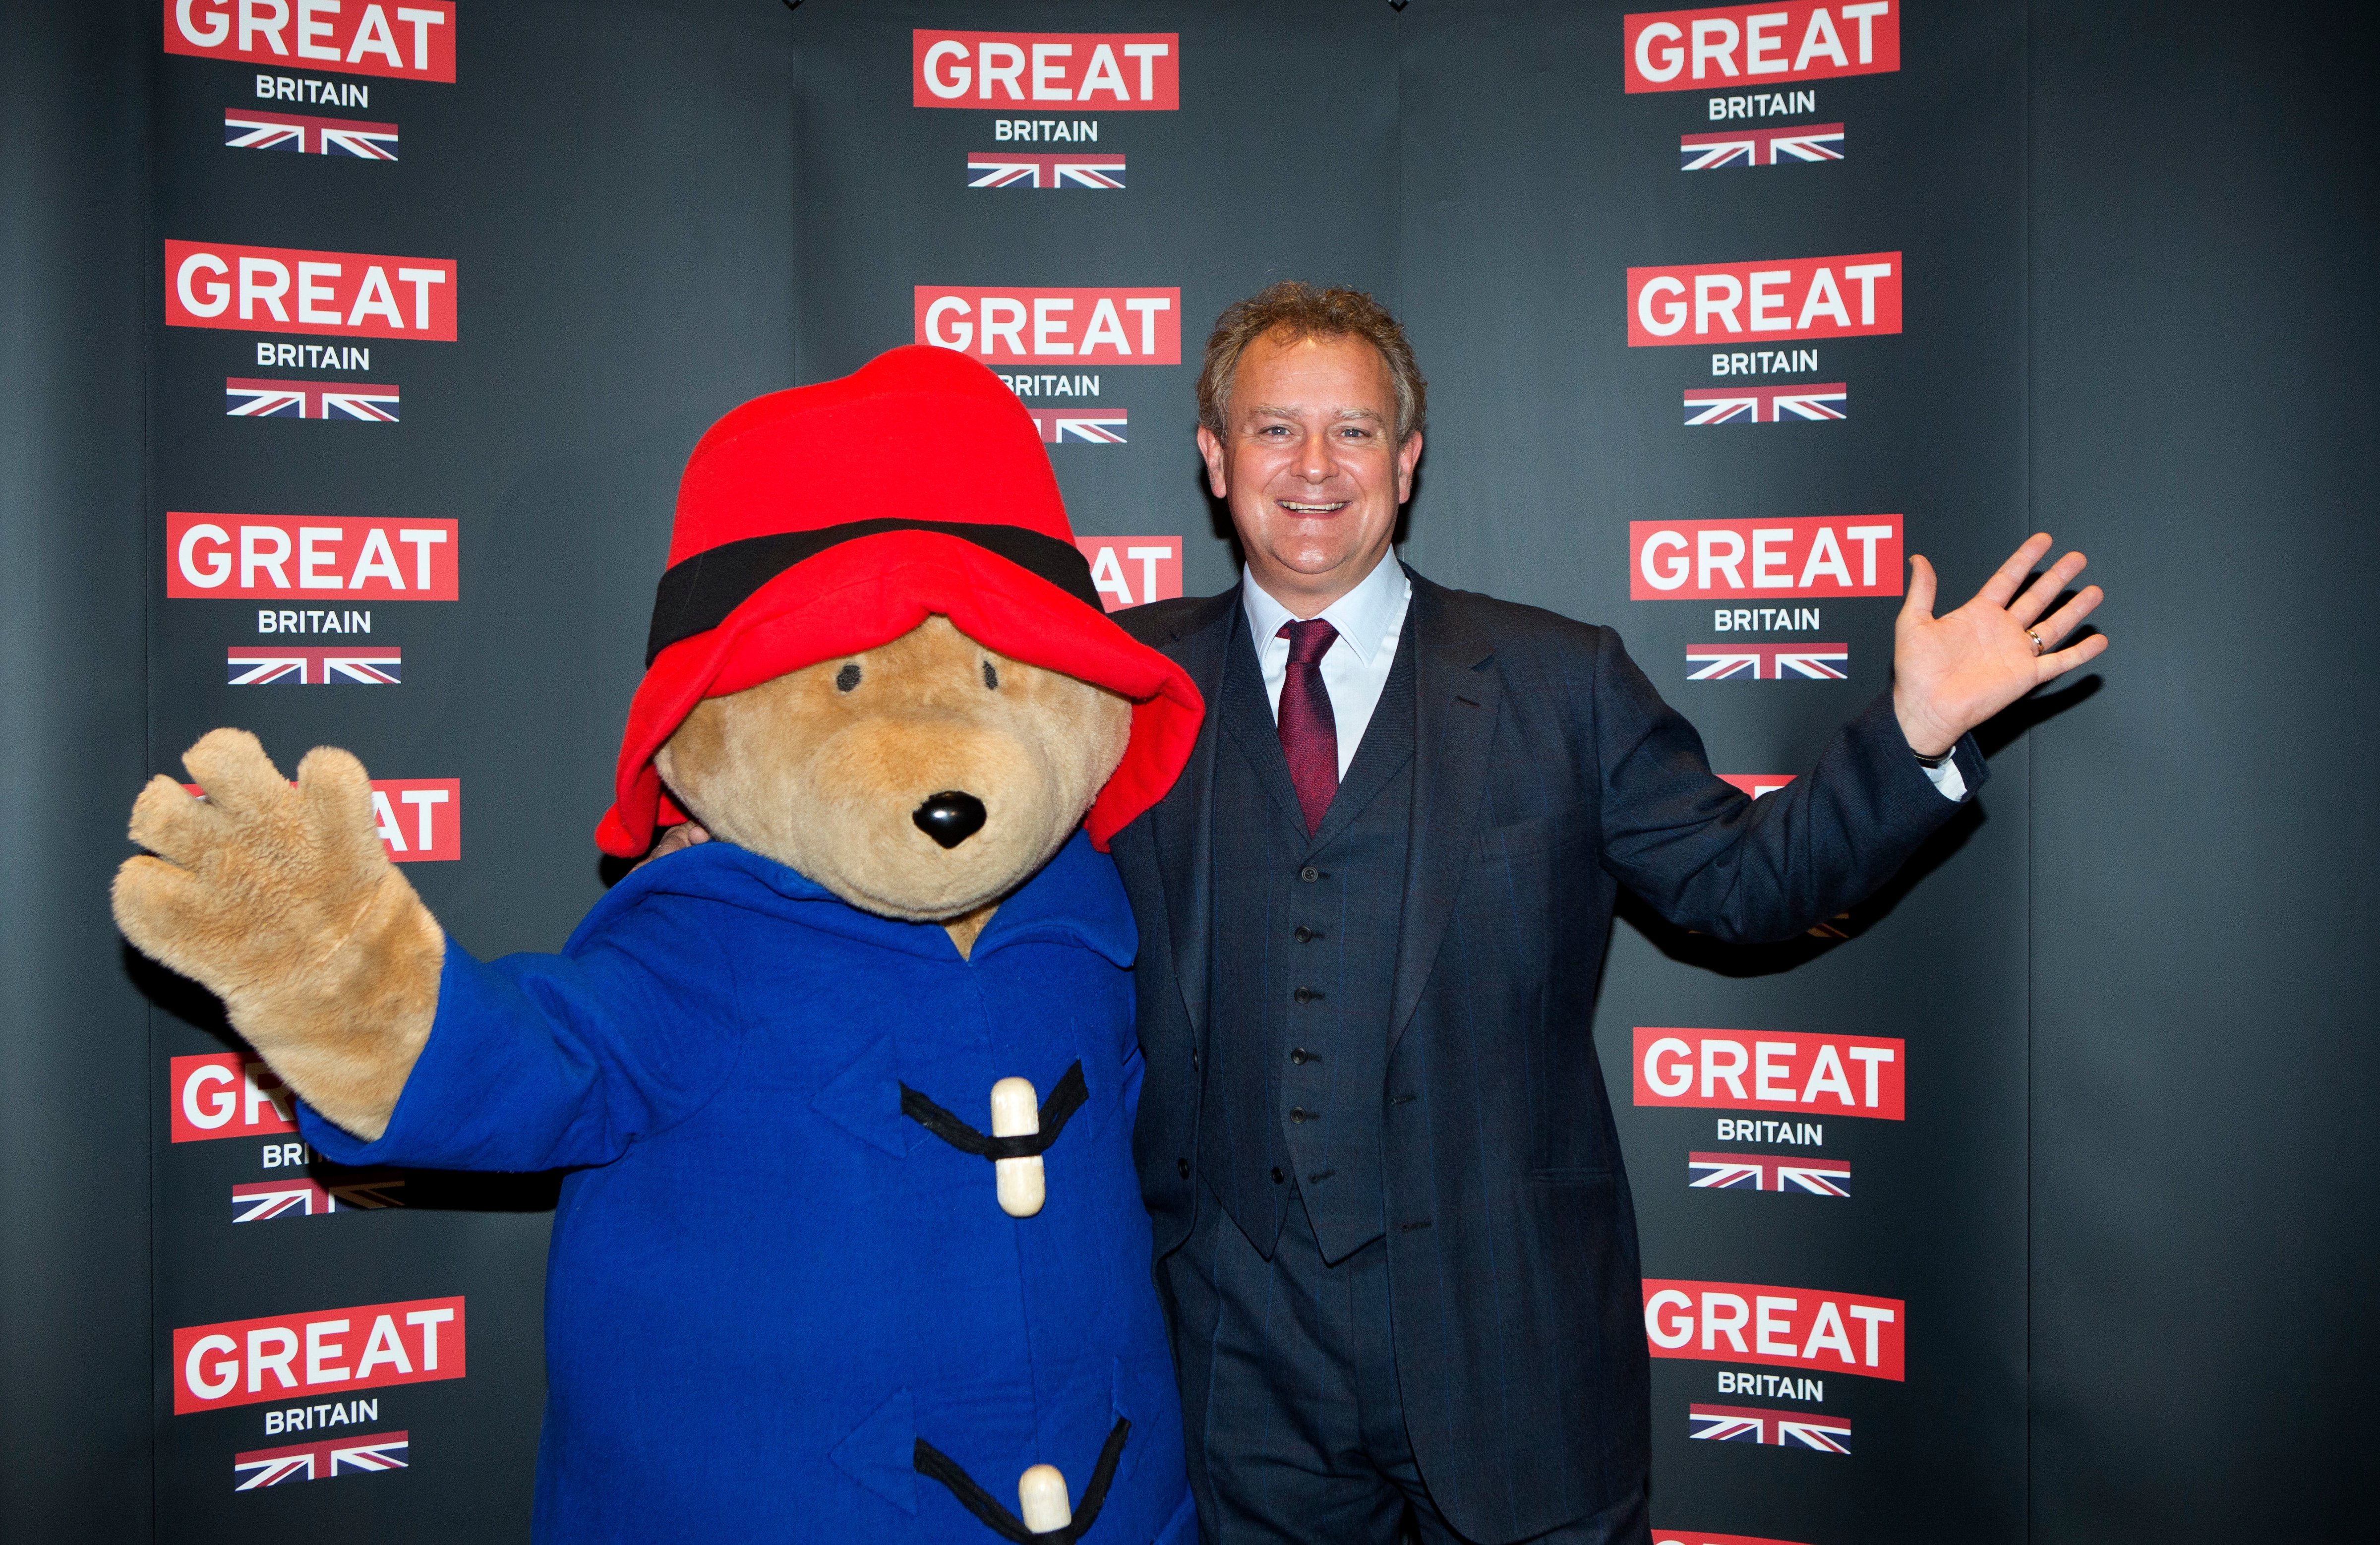 Actor Hugh Bonneville poses with a person dressed as Paddington Bear during the photo call for the film Paddington Bear at The British Embassy in Berlin, during the International Film Festival Berlinale, Feb. 7, 2014. (Axel Schmidt—AP)